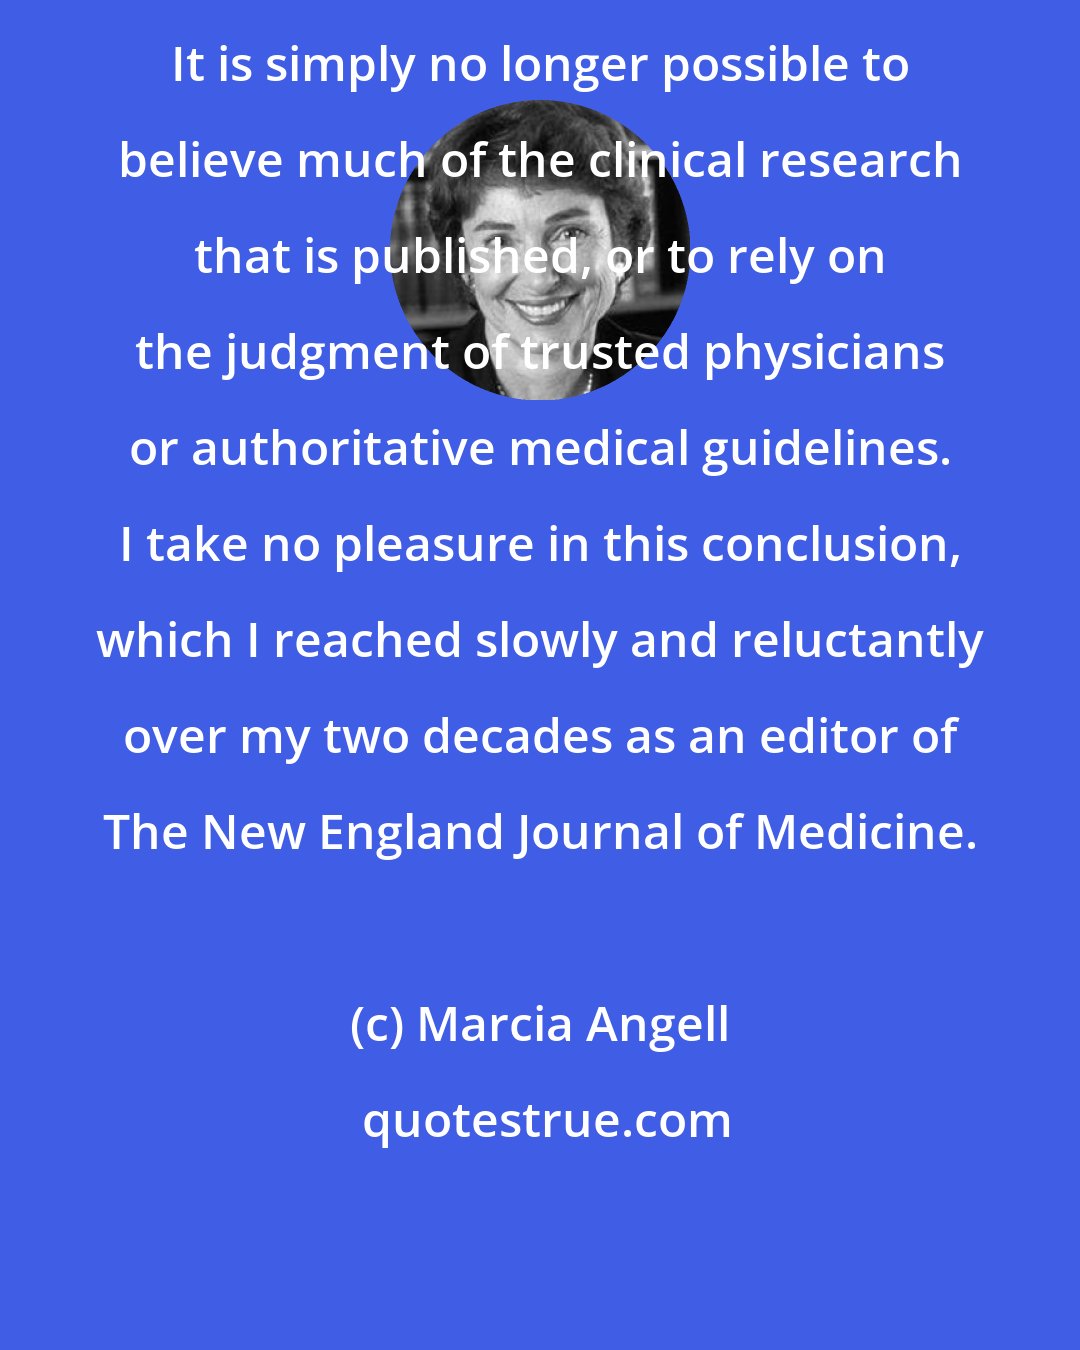 Marcia Angell: It is simply no longer possible to believe much of the clinical research that is published, or to rely on the judgment of trusted physicians or authoritative medical guidelines. I take no pleasure in this conclusion, which I reached slowly and reluctantly over my two decades as an editor of The New England Journal of Medicine.